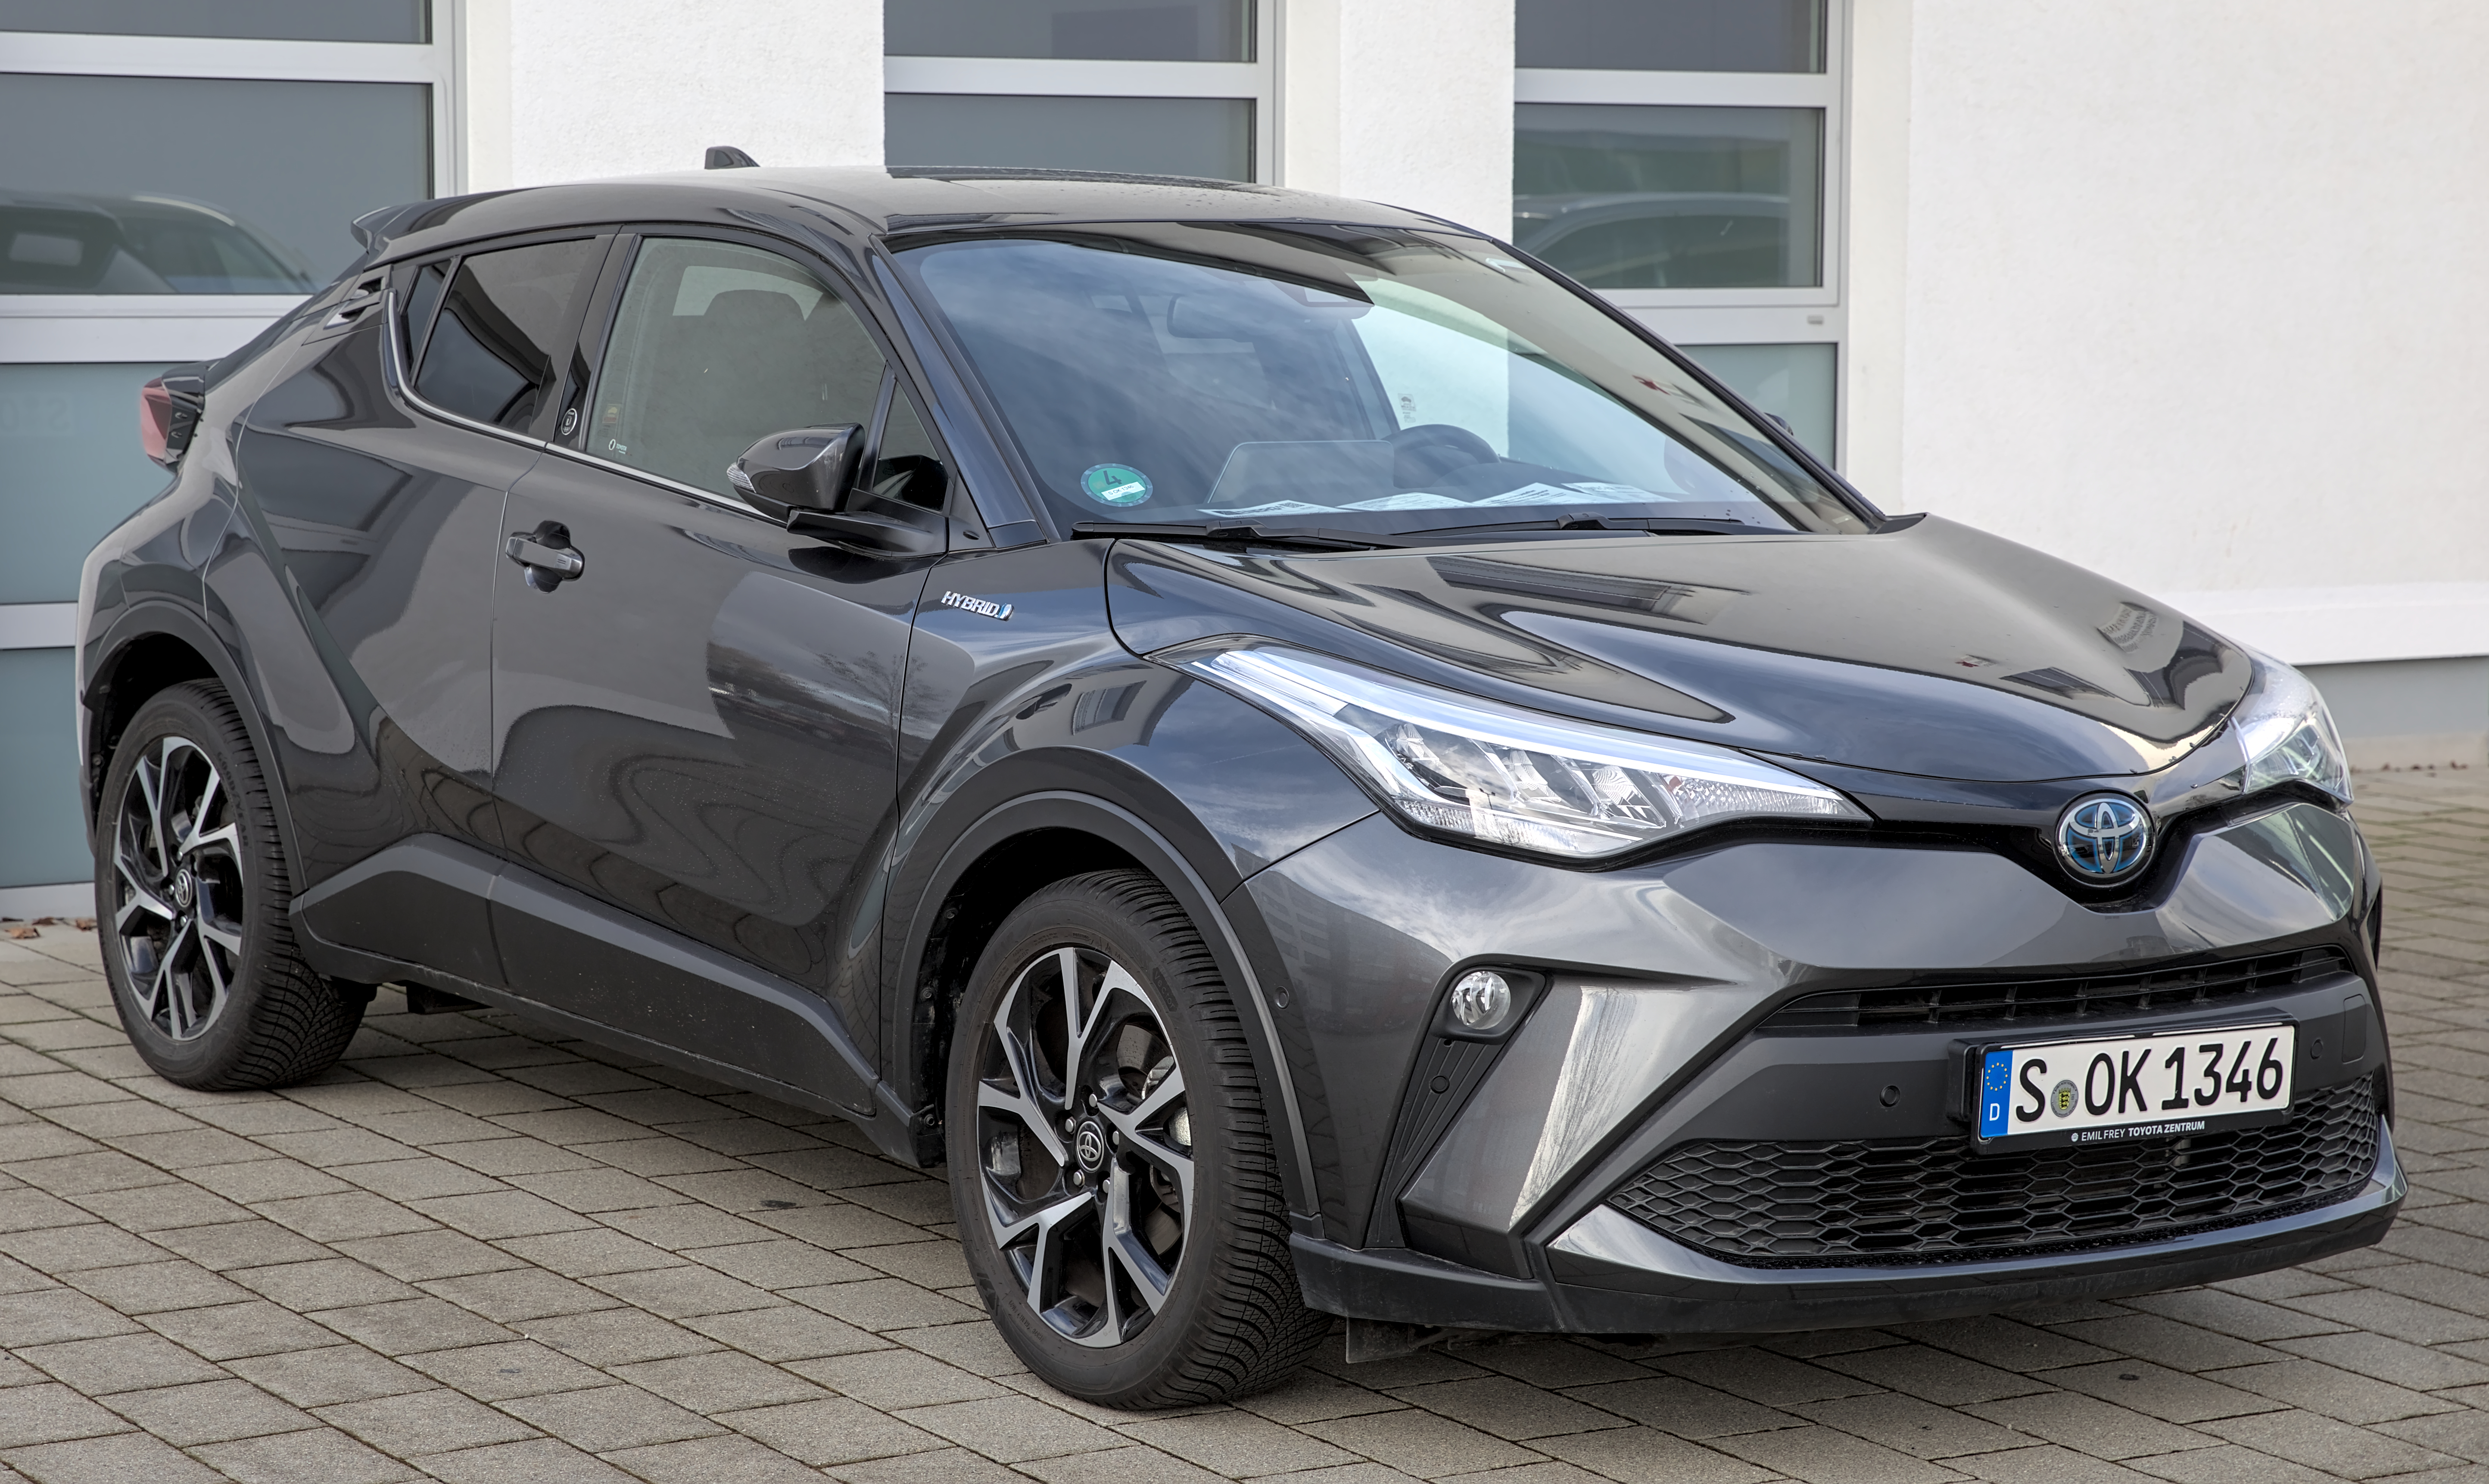 Toyota's C-HR Gets a Performance Version